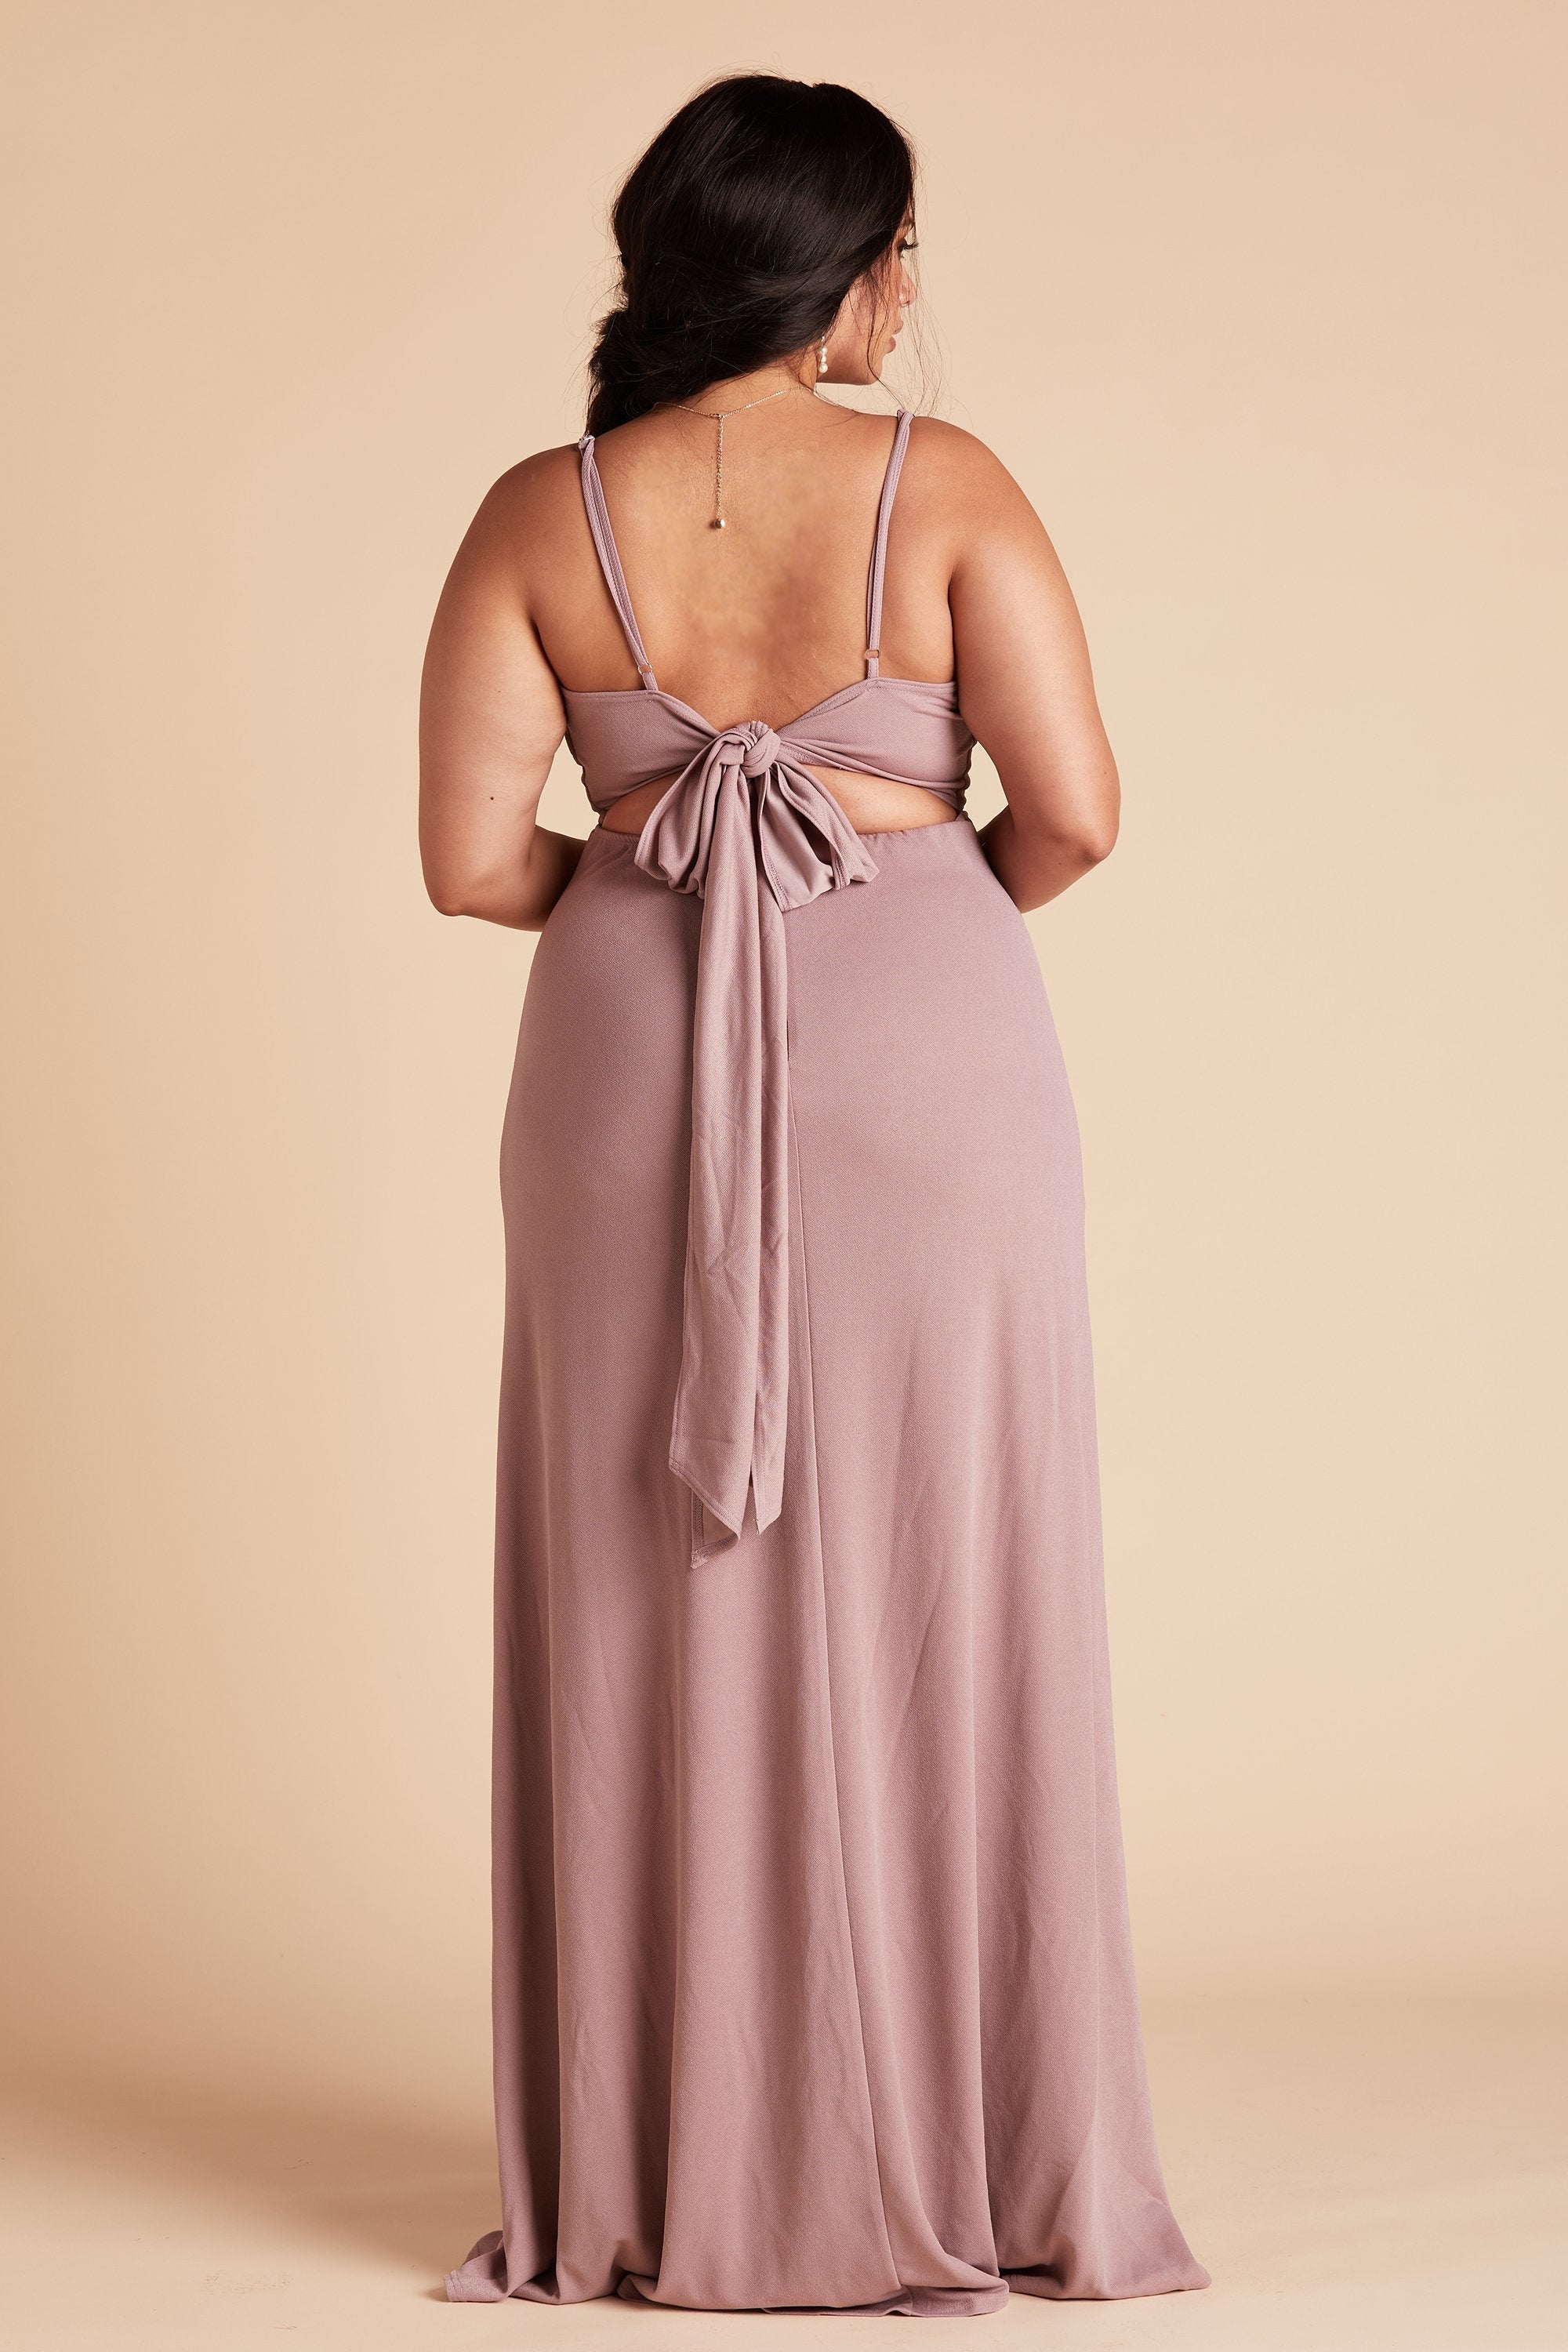 Benny plus size bridesmaid dress in dark mauve crepe by Birdy Grey, back view